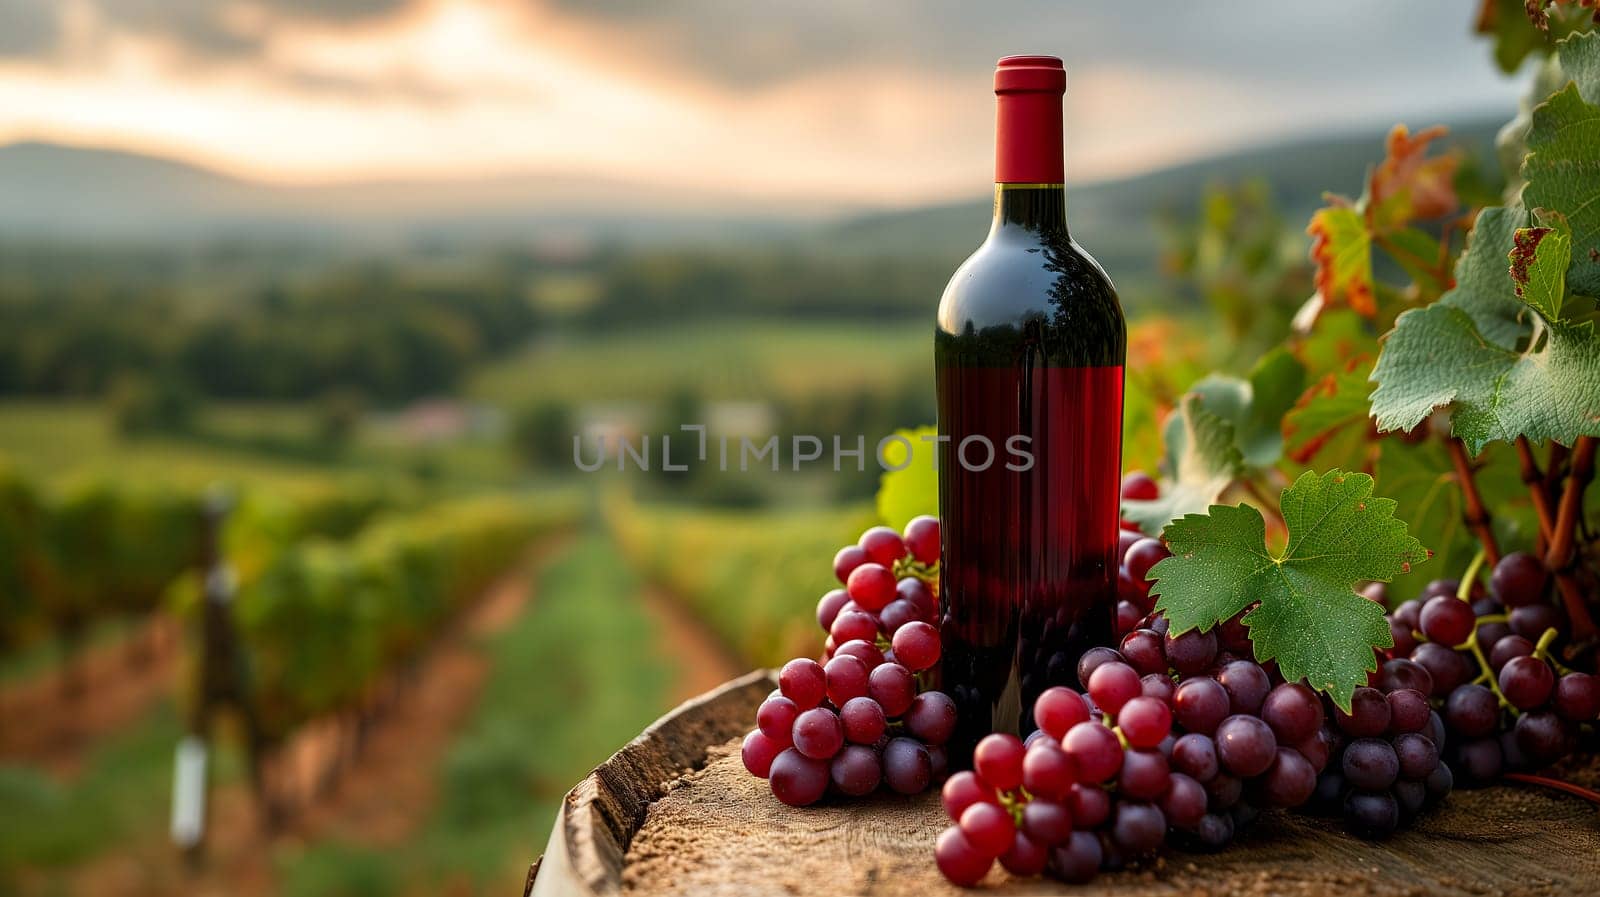 A red wine bottle in front of a landscape of grape farmland. Neural network generated image. Not based on any actual scene or pattern.